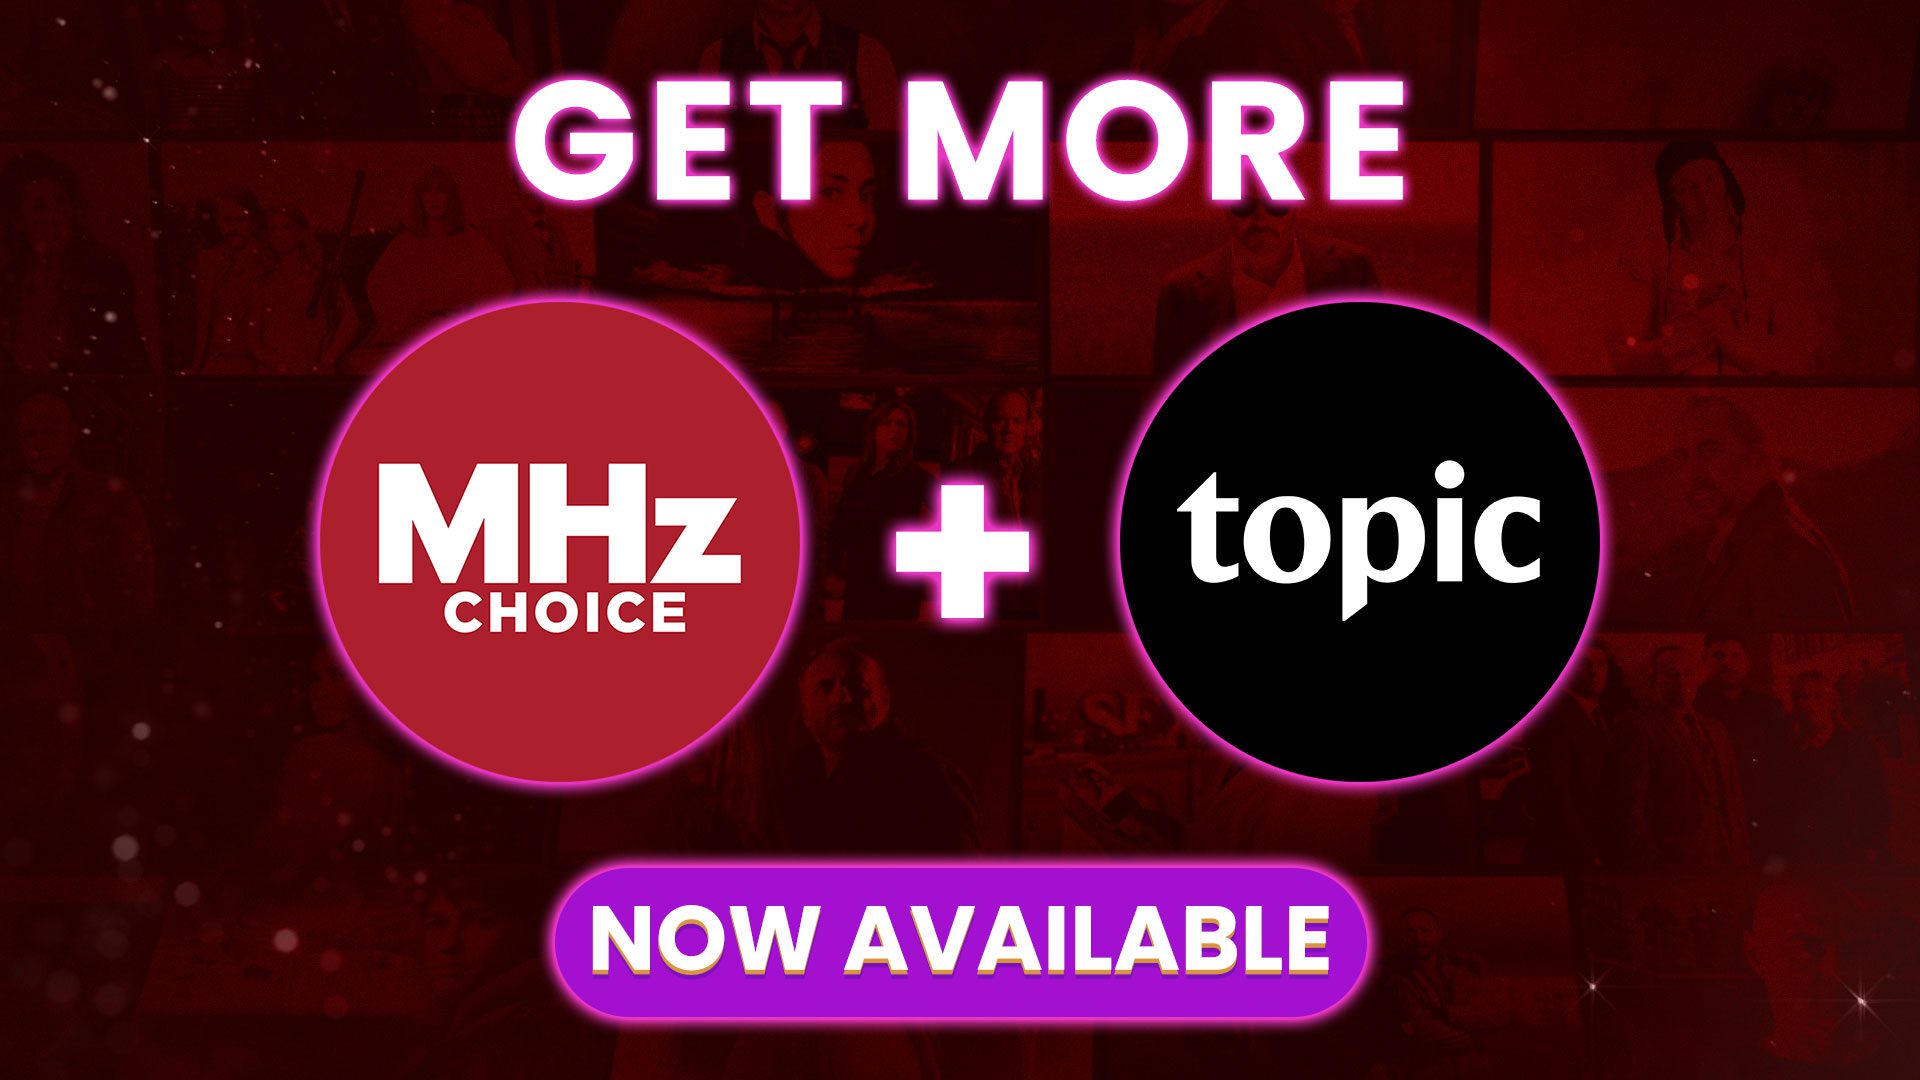 MHZCHOICE MERGE SIZ MHzChoice+Topic GetMore NowAvailable